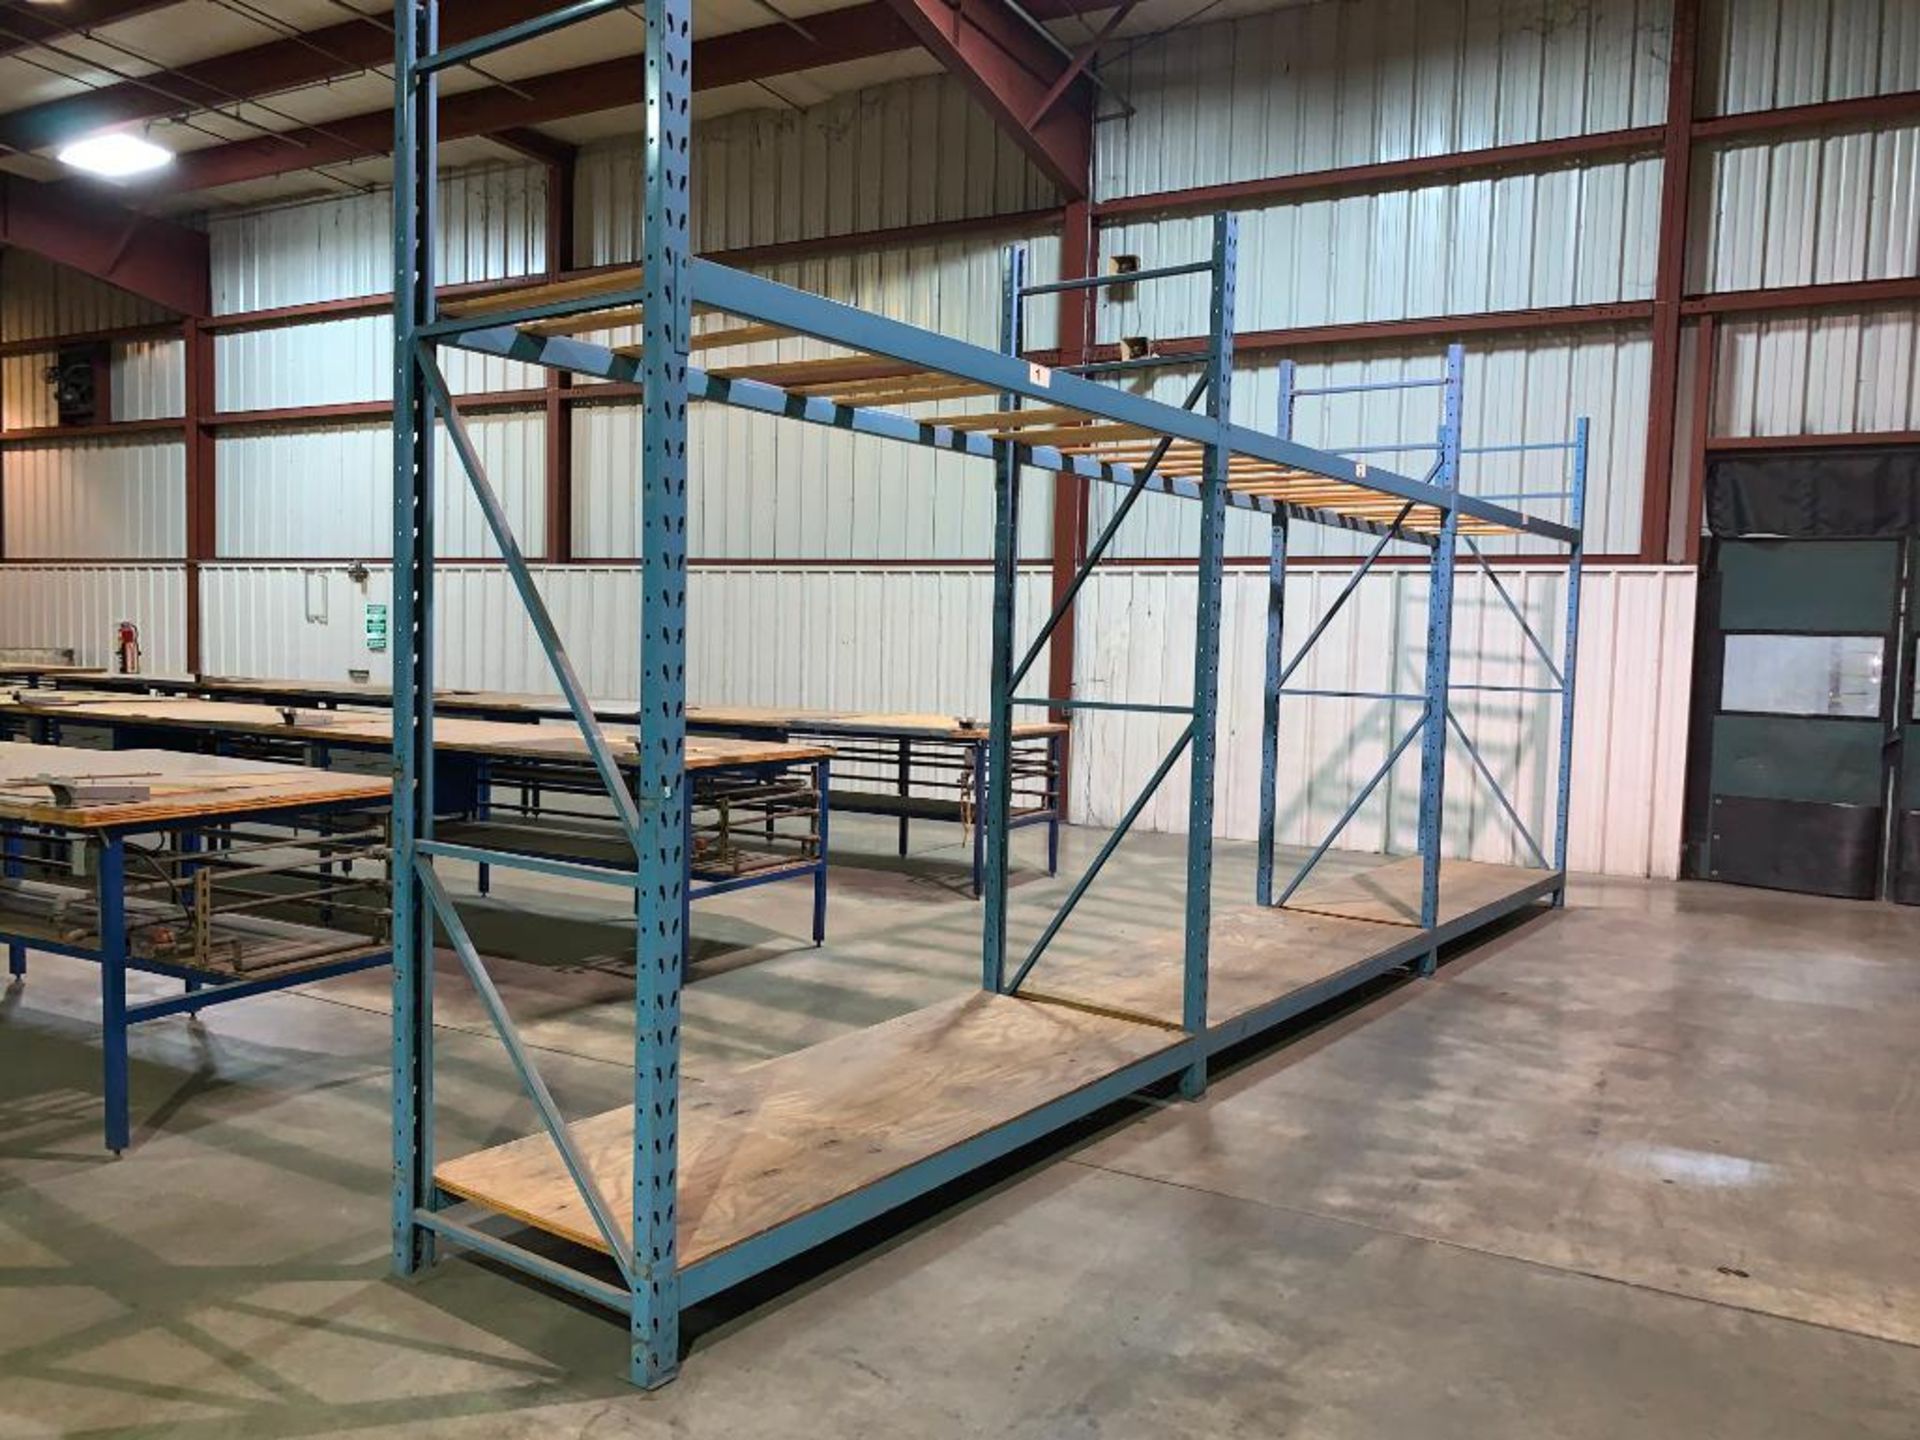 LOT: (3) Sections 8 ft. W x 4 ft. D x 10 ft. H Pallet Rack (LOCATED IN MT. VERNON, IL)